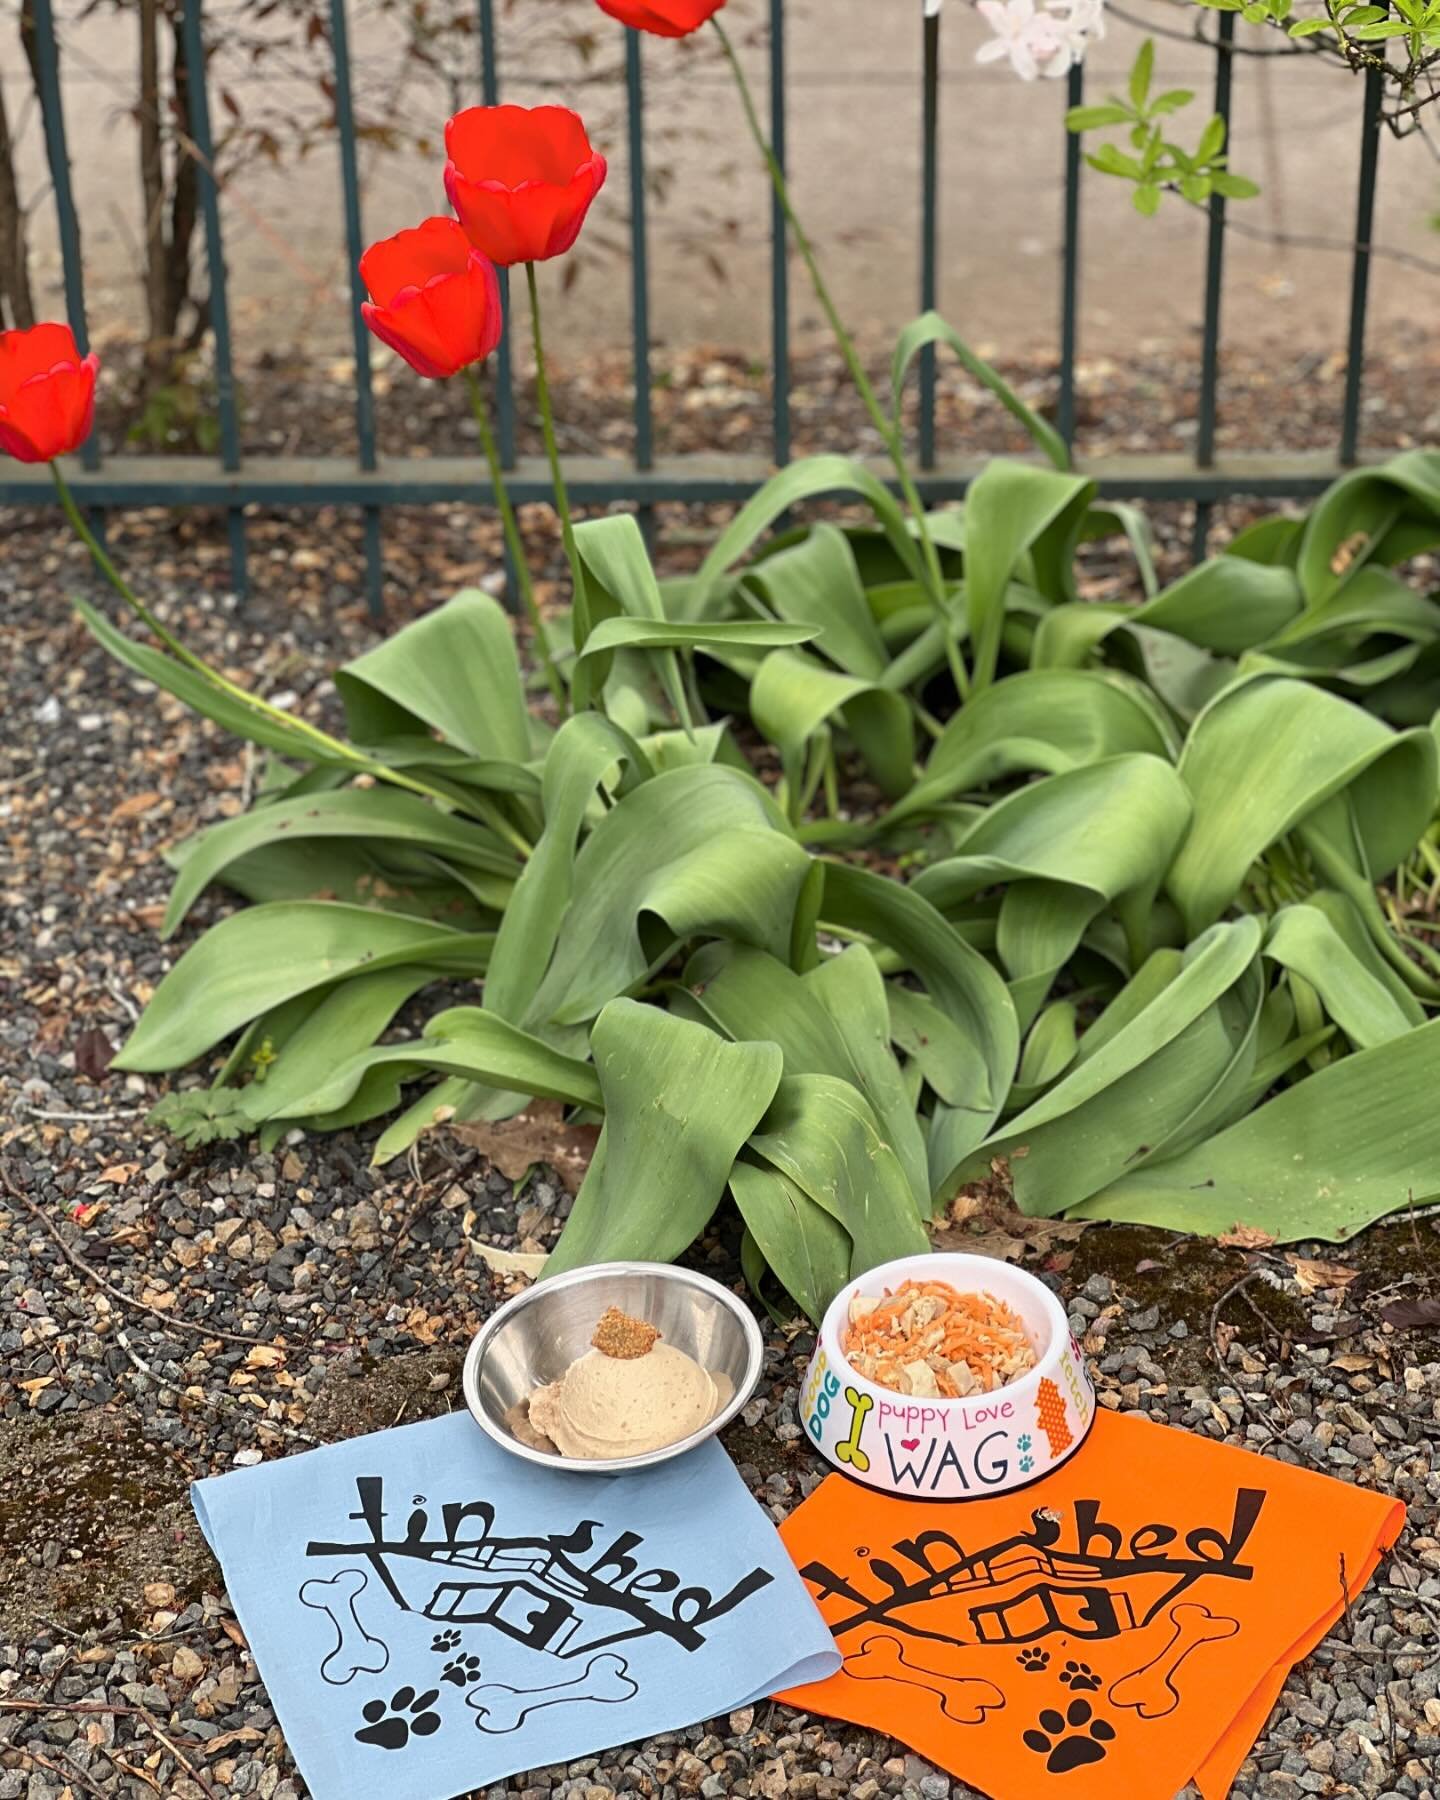 Next time you bring your sweet pooch in consider ordering them a Fido Food (chicken and sweet potato) or Doggie Ice Cream (peanut butter, banana and yogurt) off the doggy menu 🐶 

AND if you purchase a doggie bandana you will not only get half off o